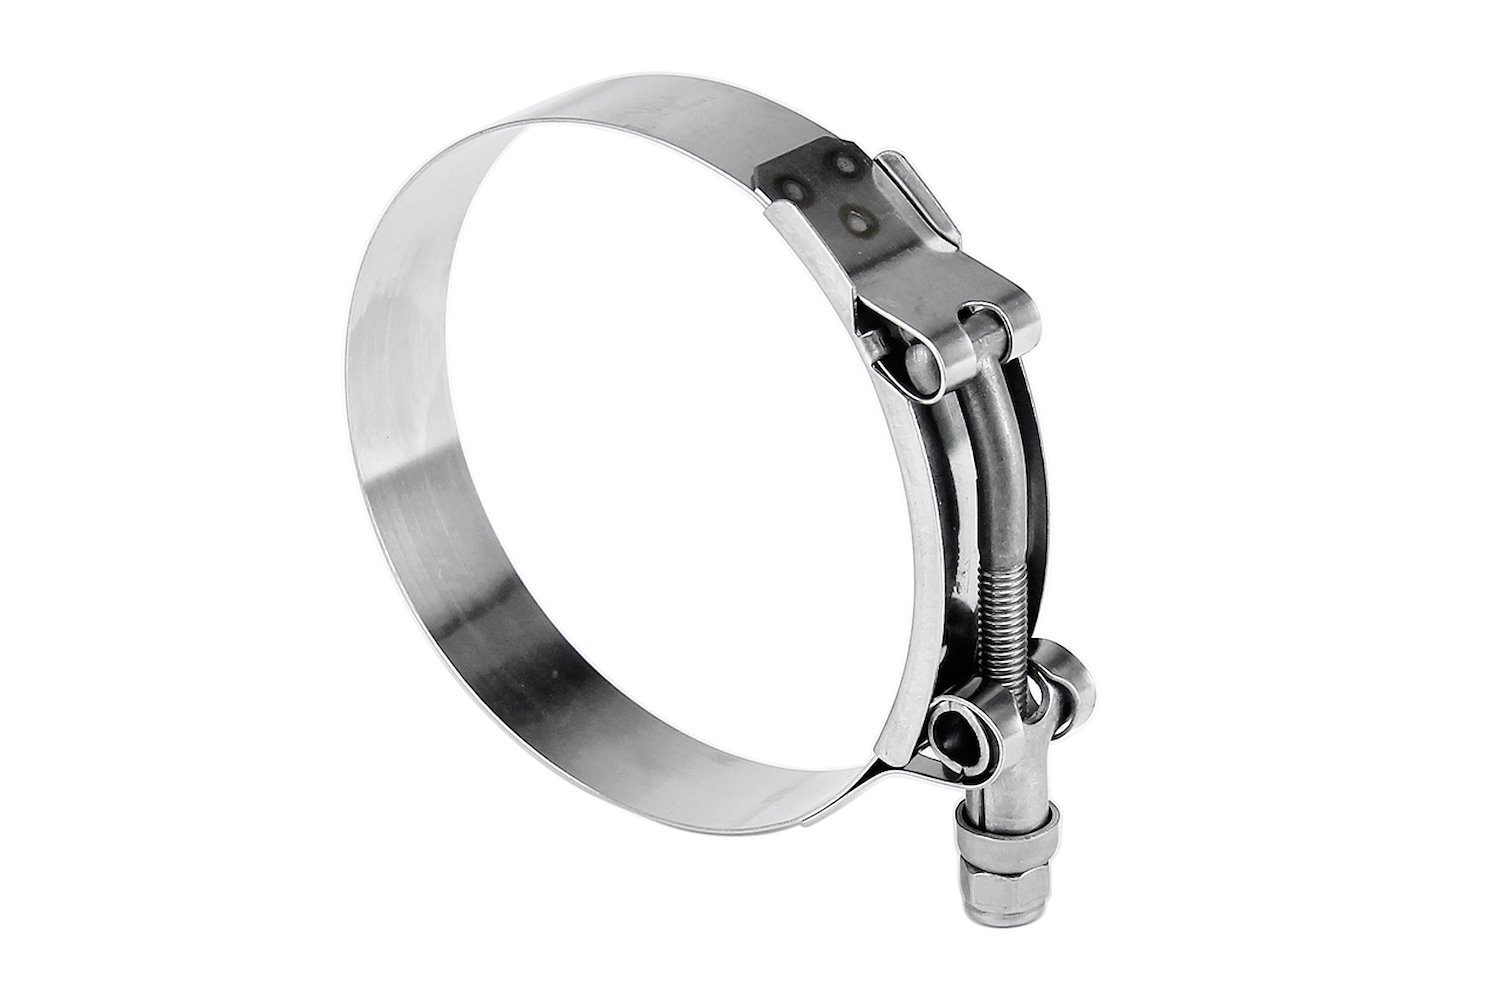 316-SSTC-41-46 100-Percent Marine Grade Stainless Steel T-Bolt Hose Clamp, Size Range: 1.61 in.- 1.77 in.